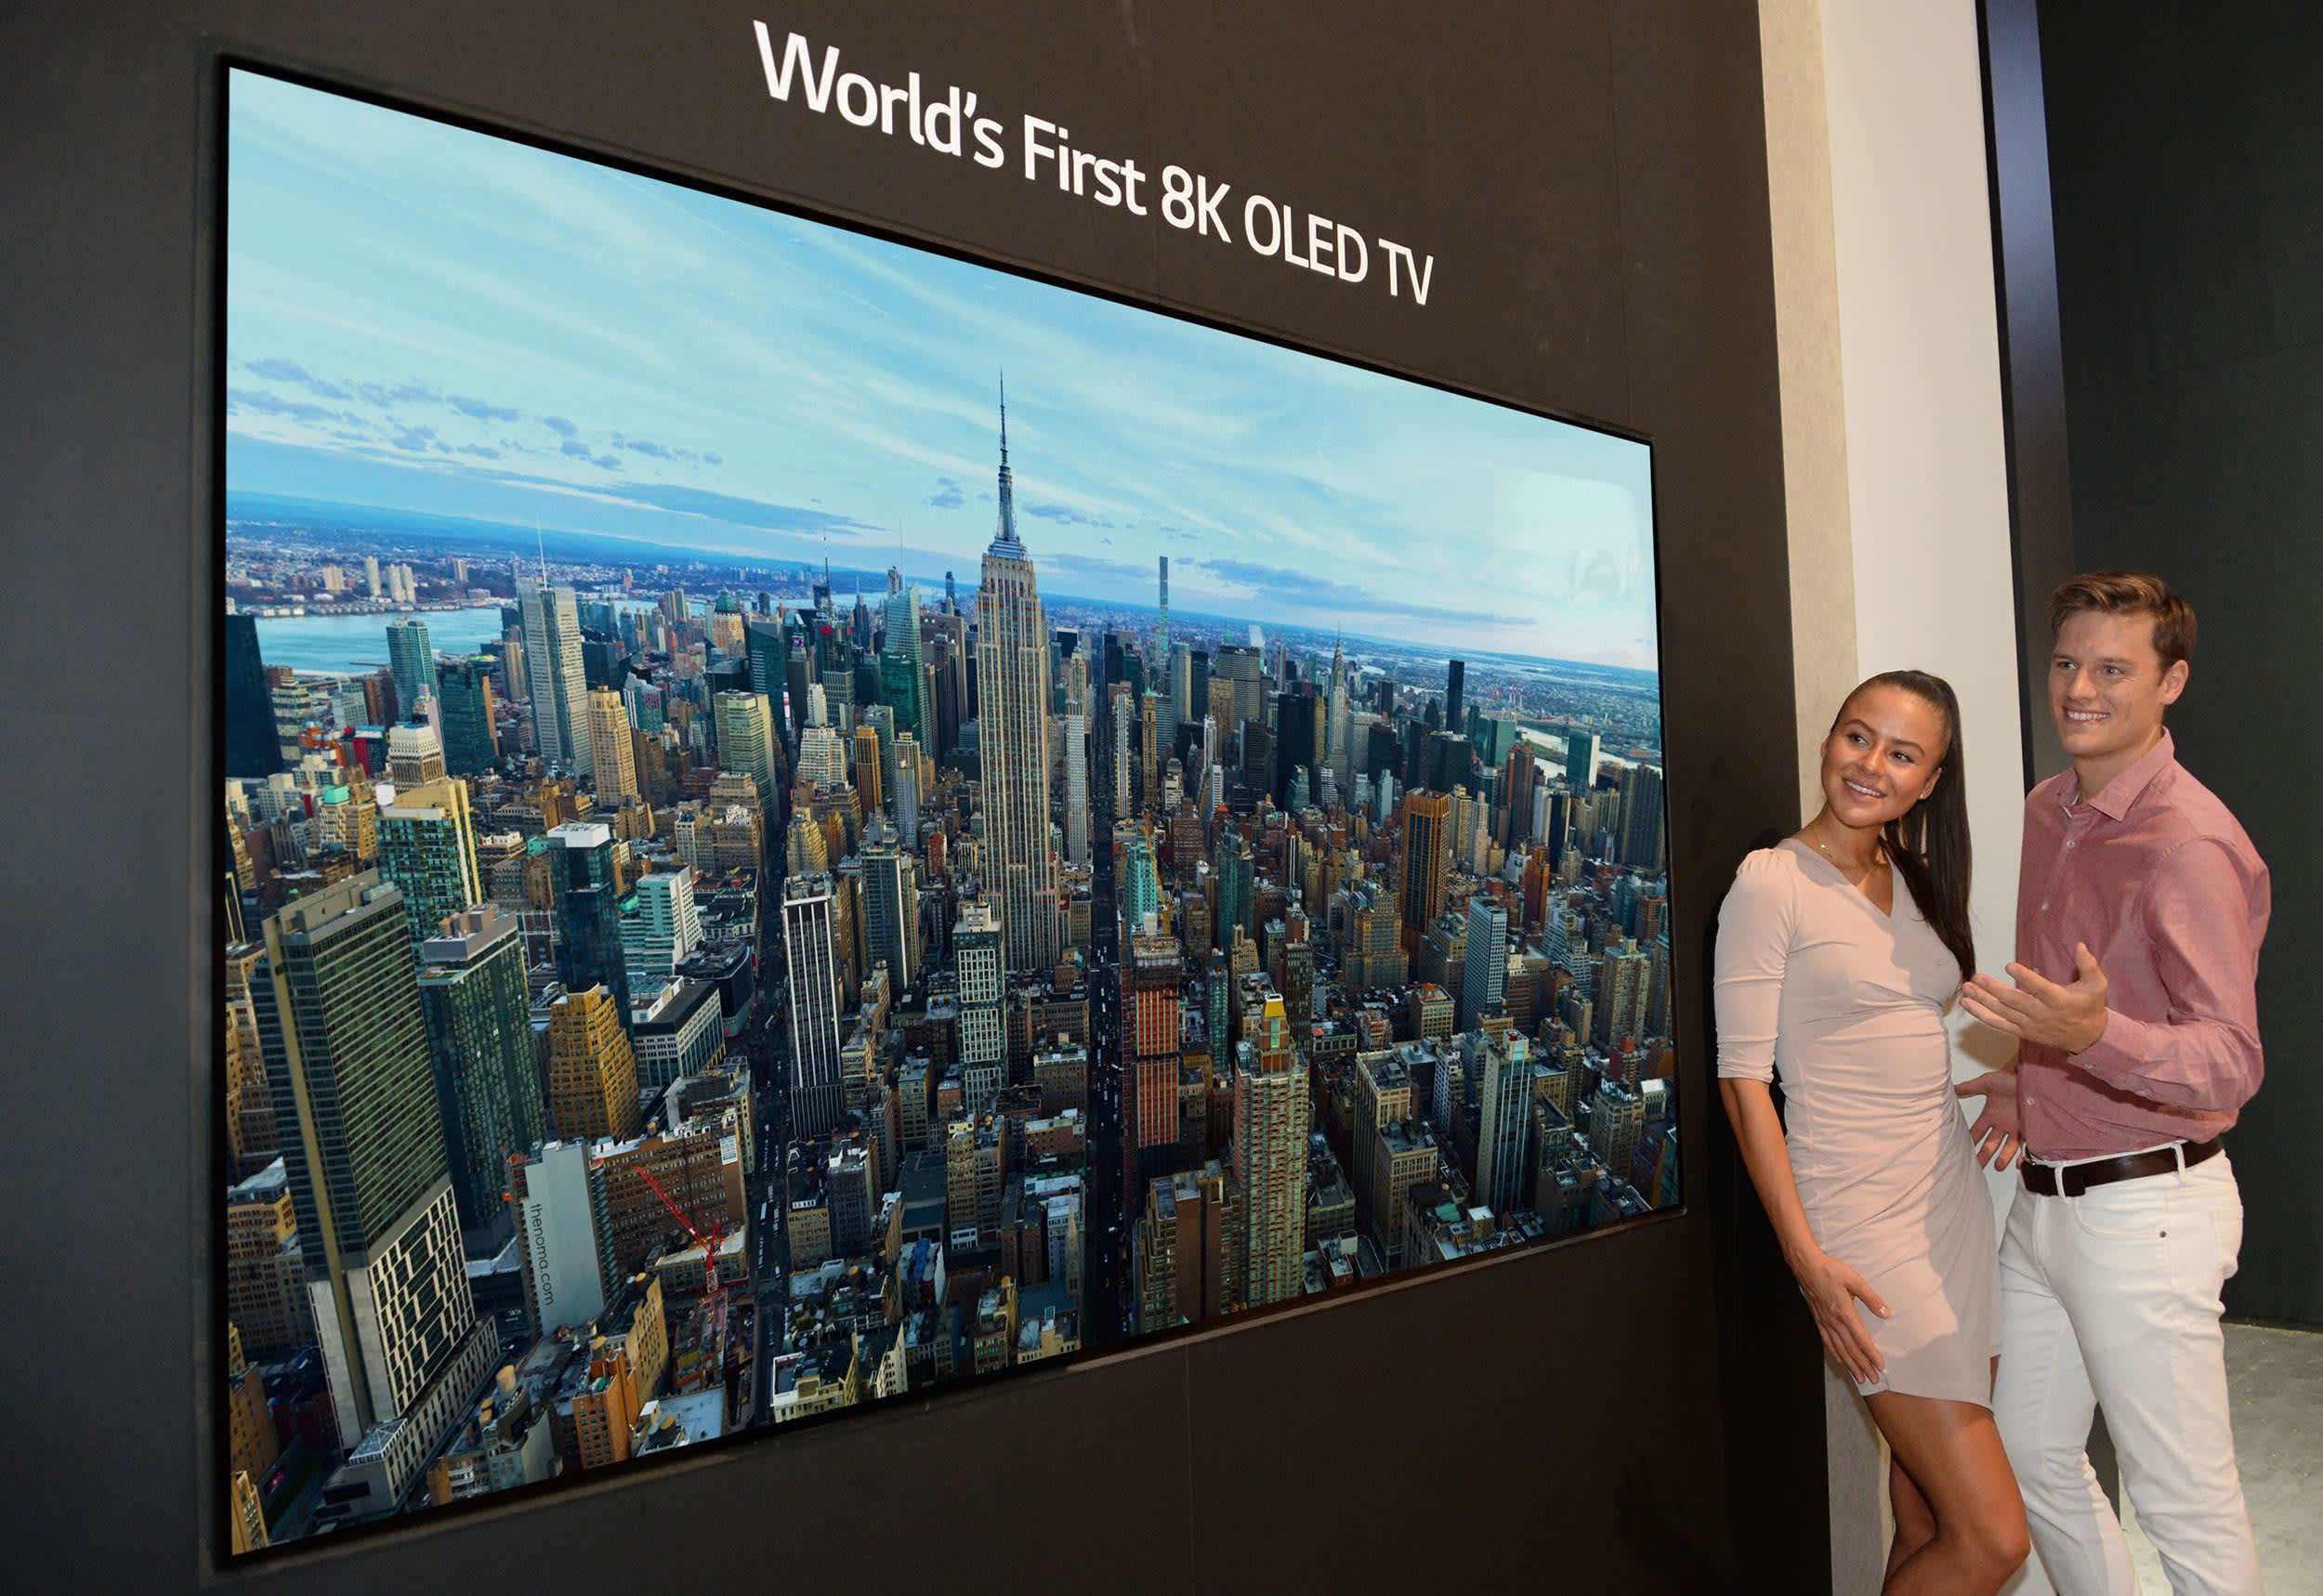 Samsung and LG launch 8K TVs in battle over future of TV